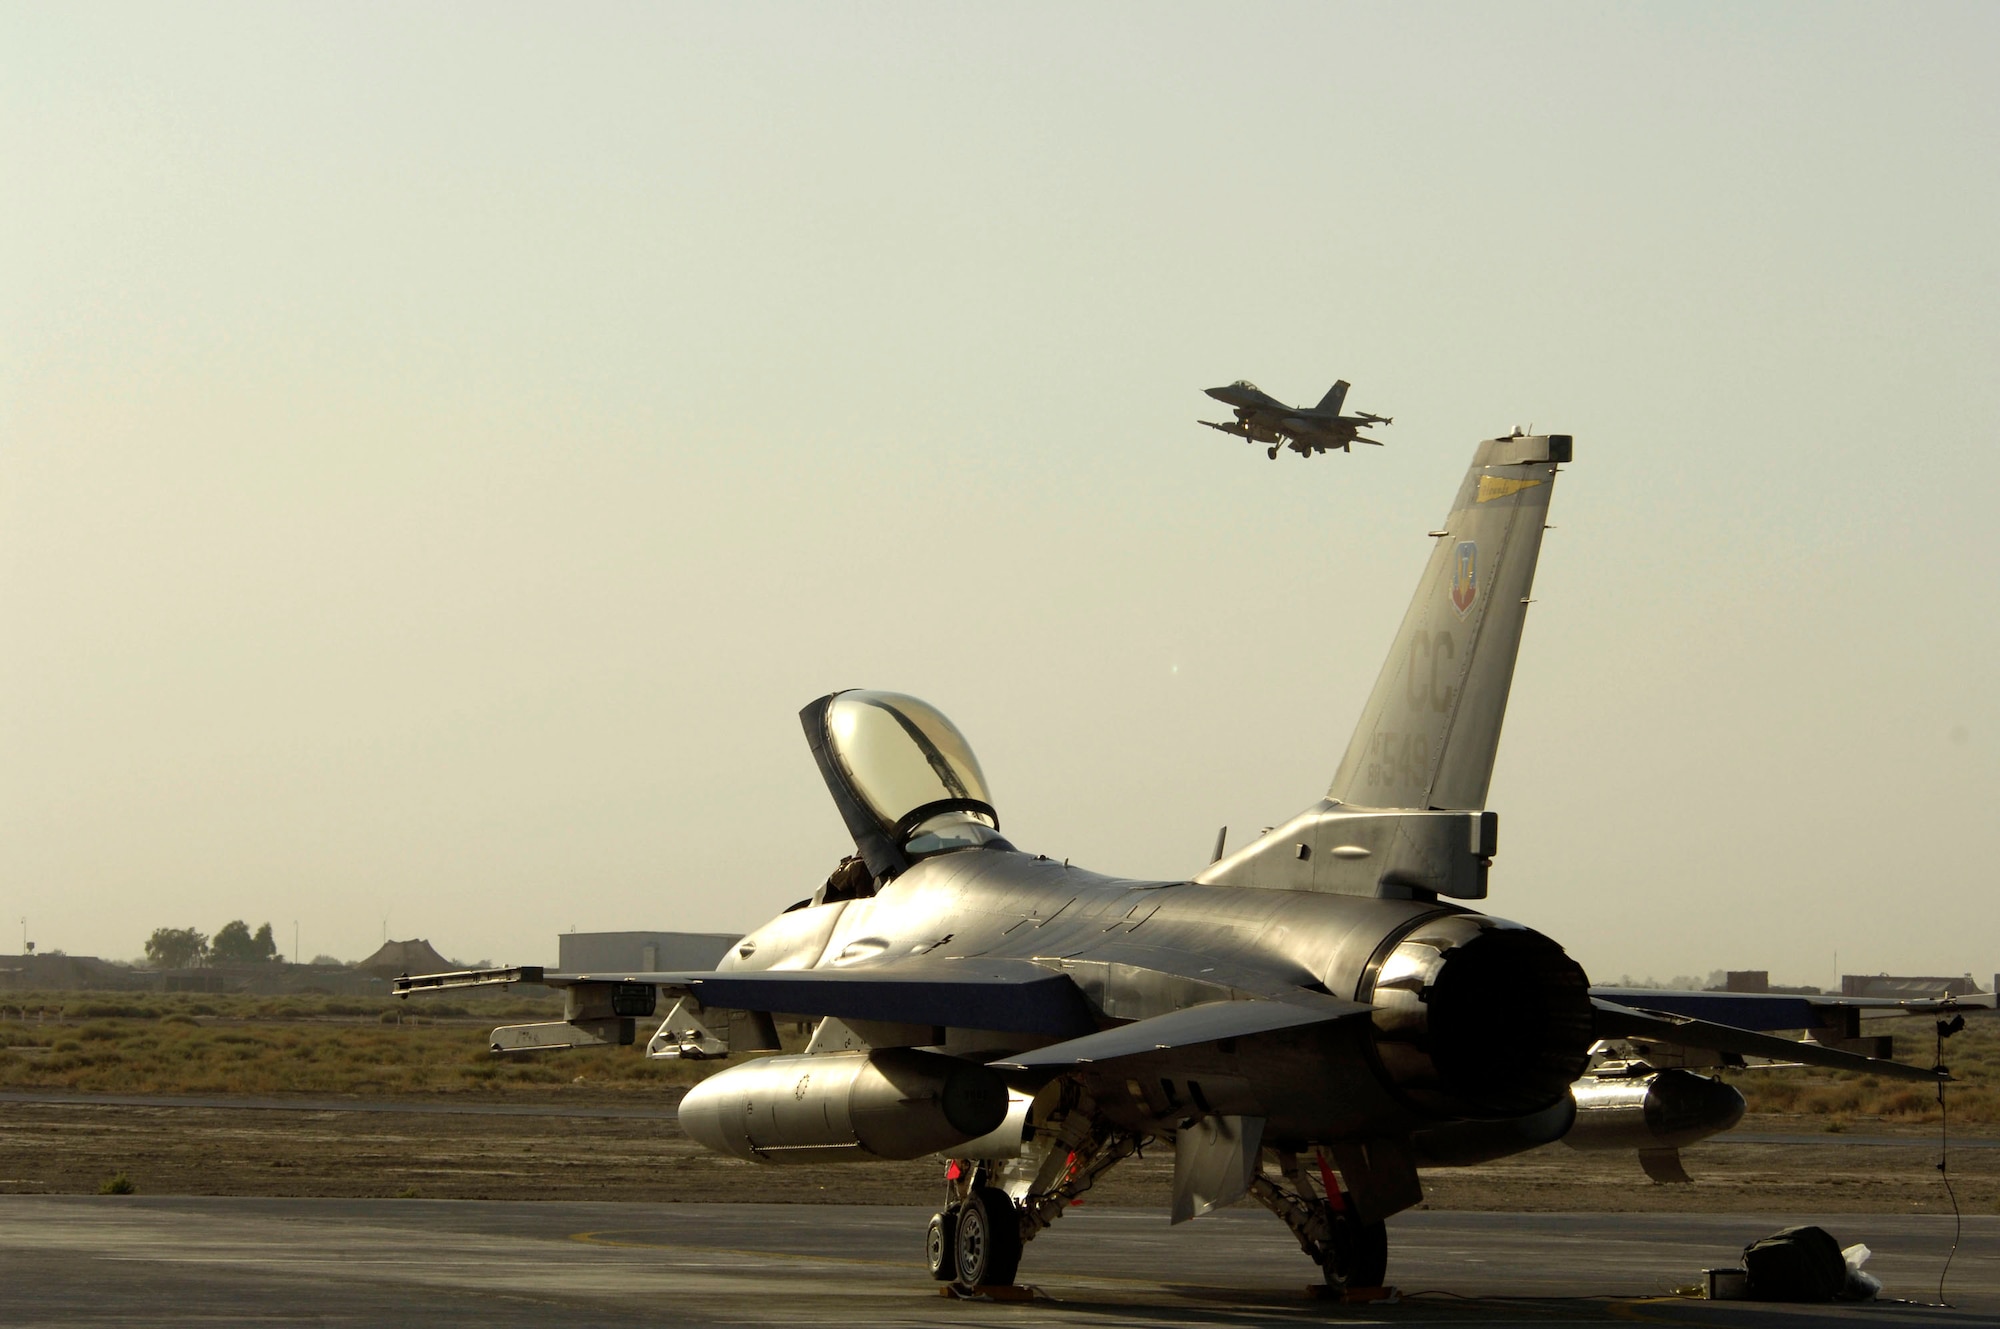 One F-16 Fighting Falcon taxis while another takes off from Balad Air Base, Iraq, Sept. 9. The F-16s, from Cannon Air Force Base, N.M., just arrived to support Operation Iraqi Freedom. (U.S. Air Force photo/Airman 1st Class Chad M. Kellum) 
